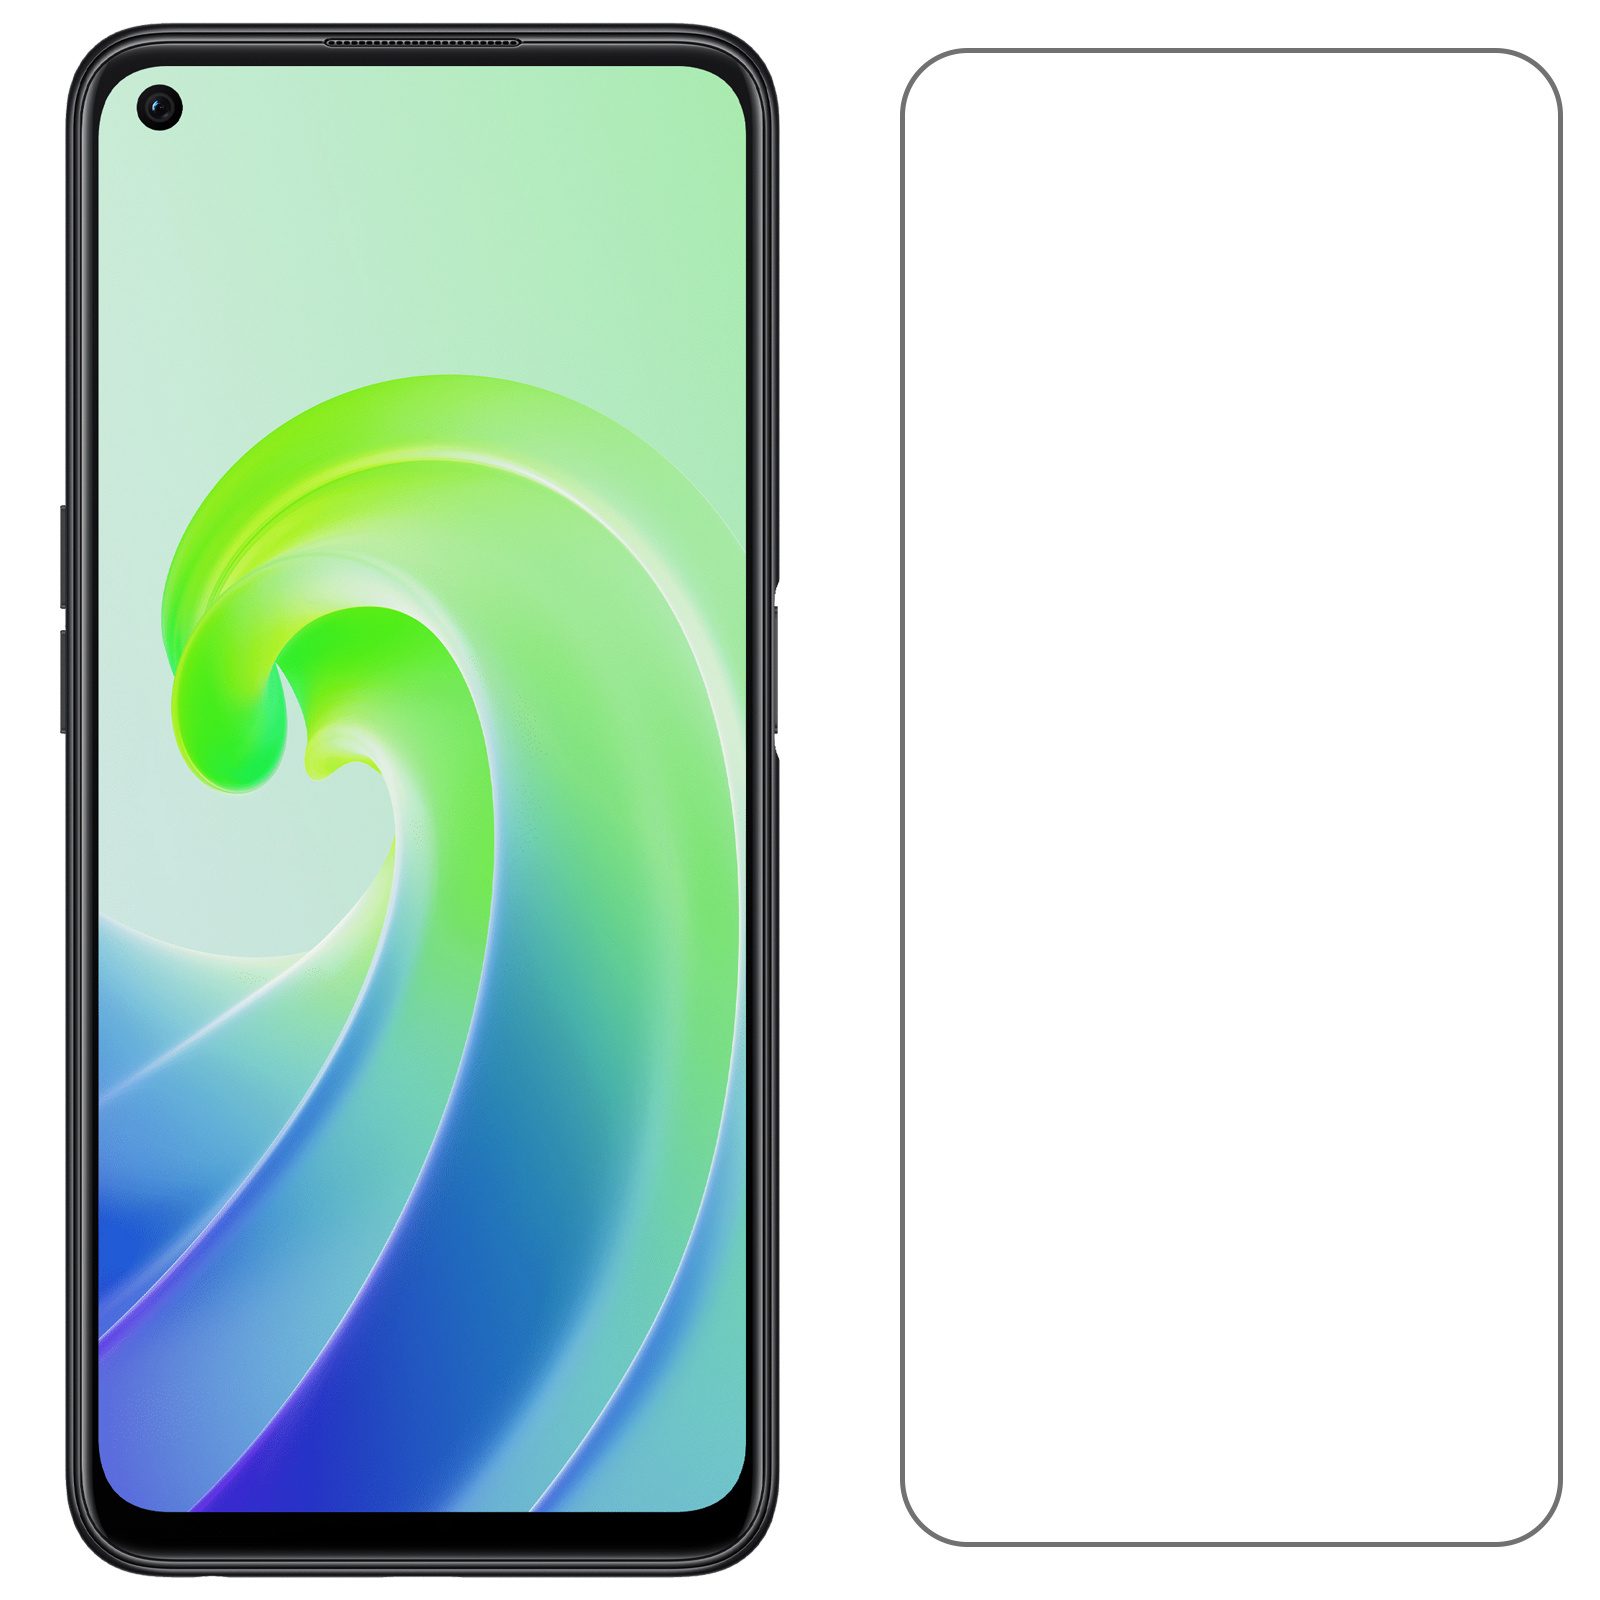 NoXx OPPO A76 Hoesje Back Cover Siliconen Case Hoes Met 2x Screenprotector - Lichtroze